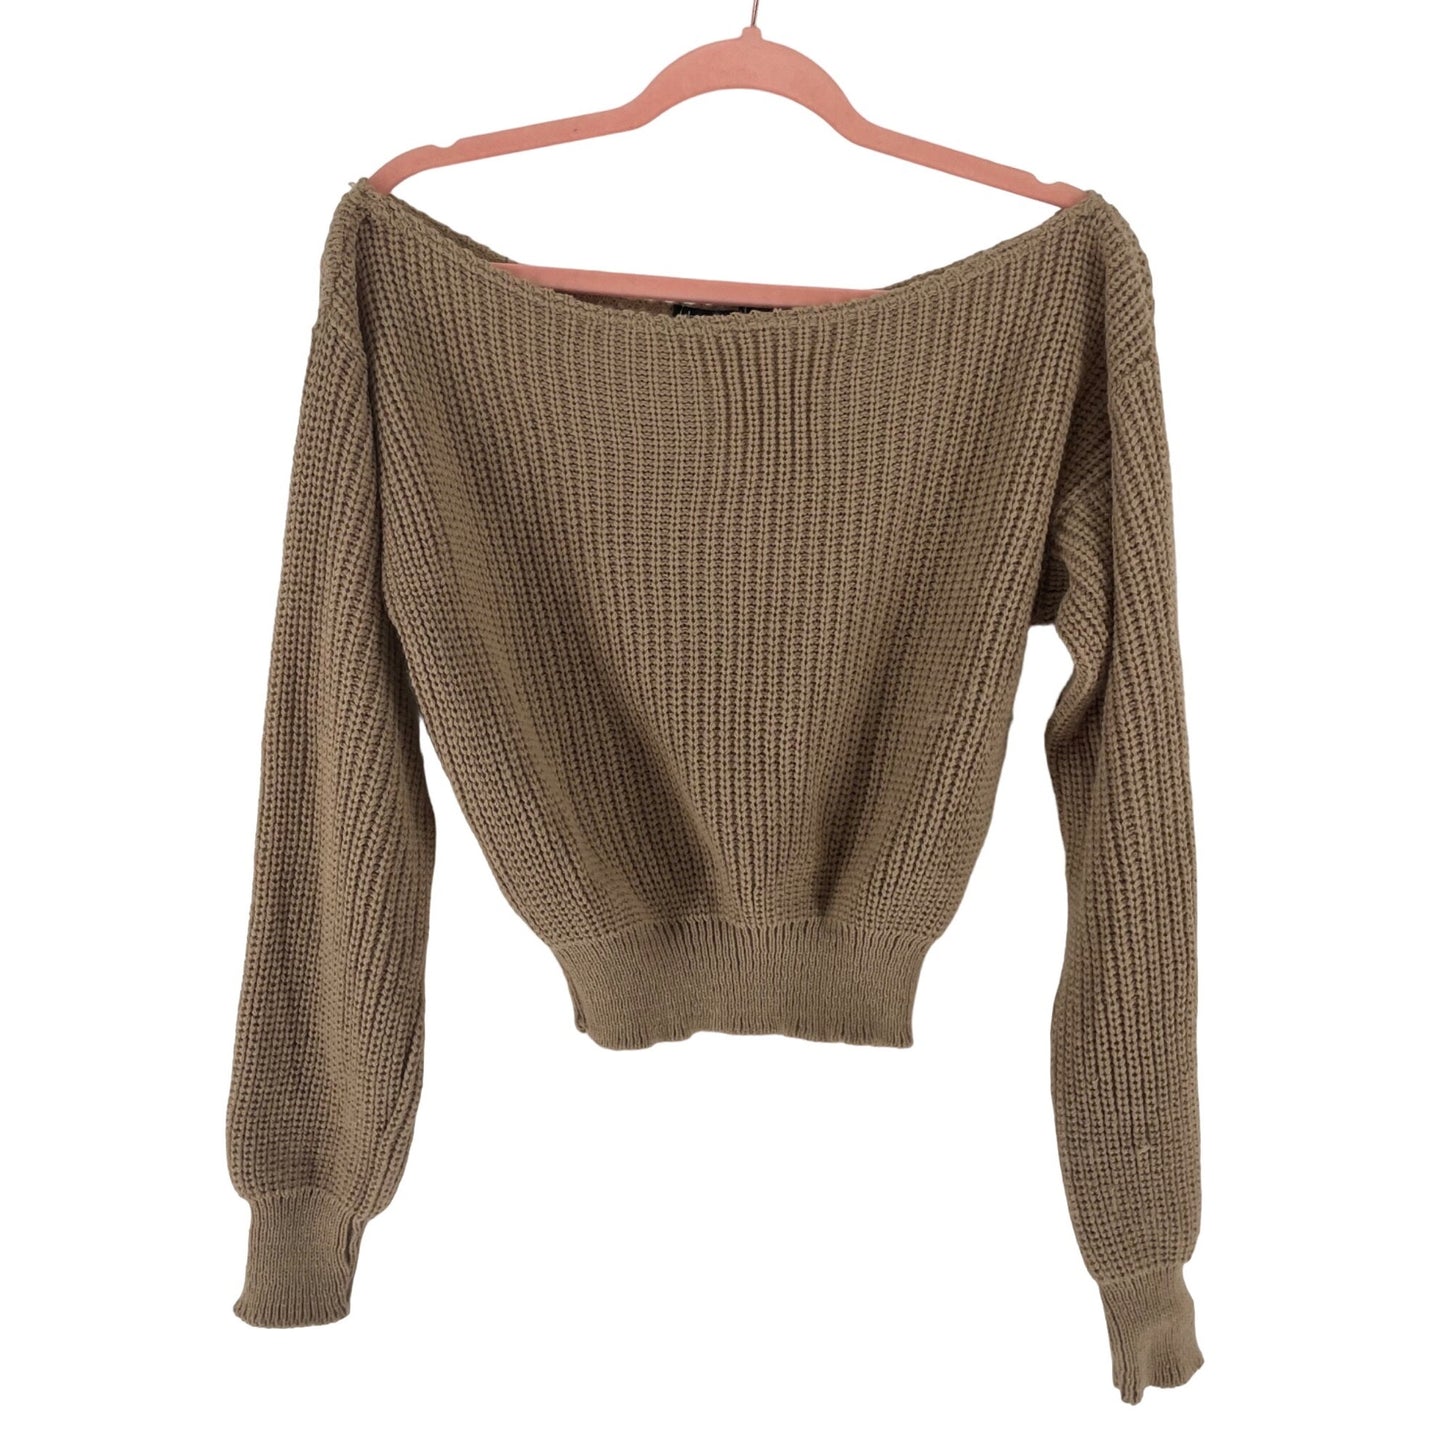 Boohoo Women's Size Small Tan Off-The-Shoulder Cropped Sweater